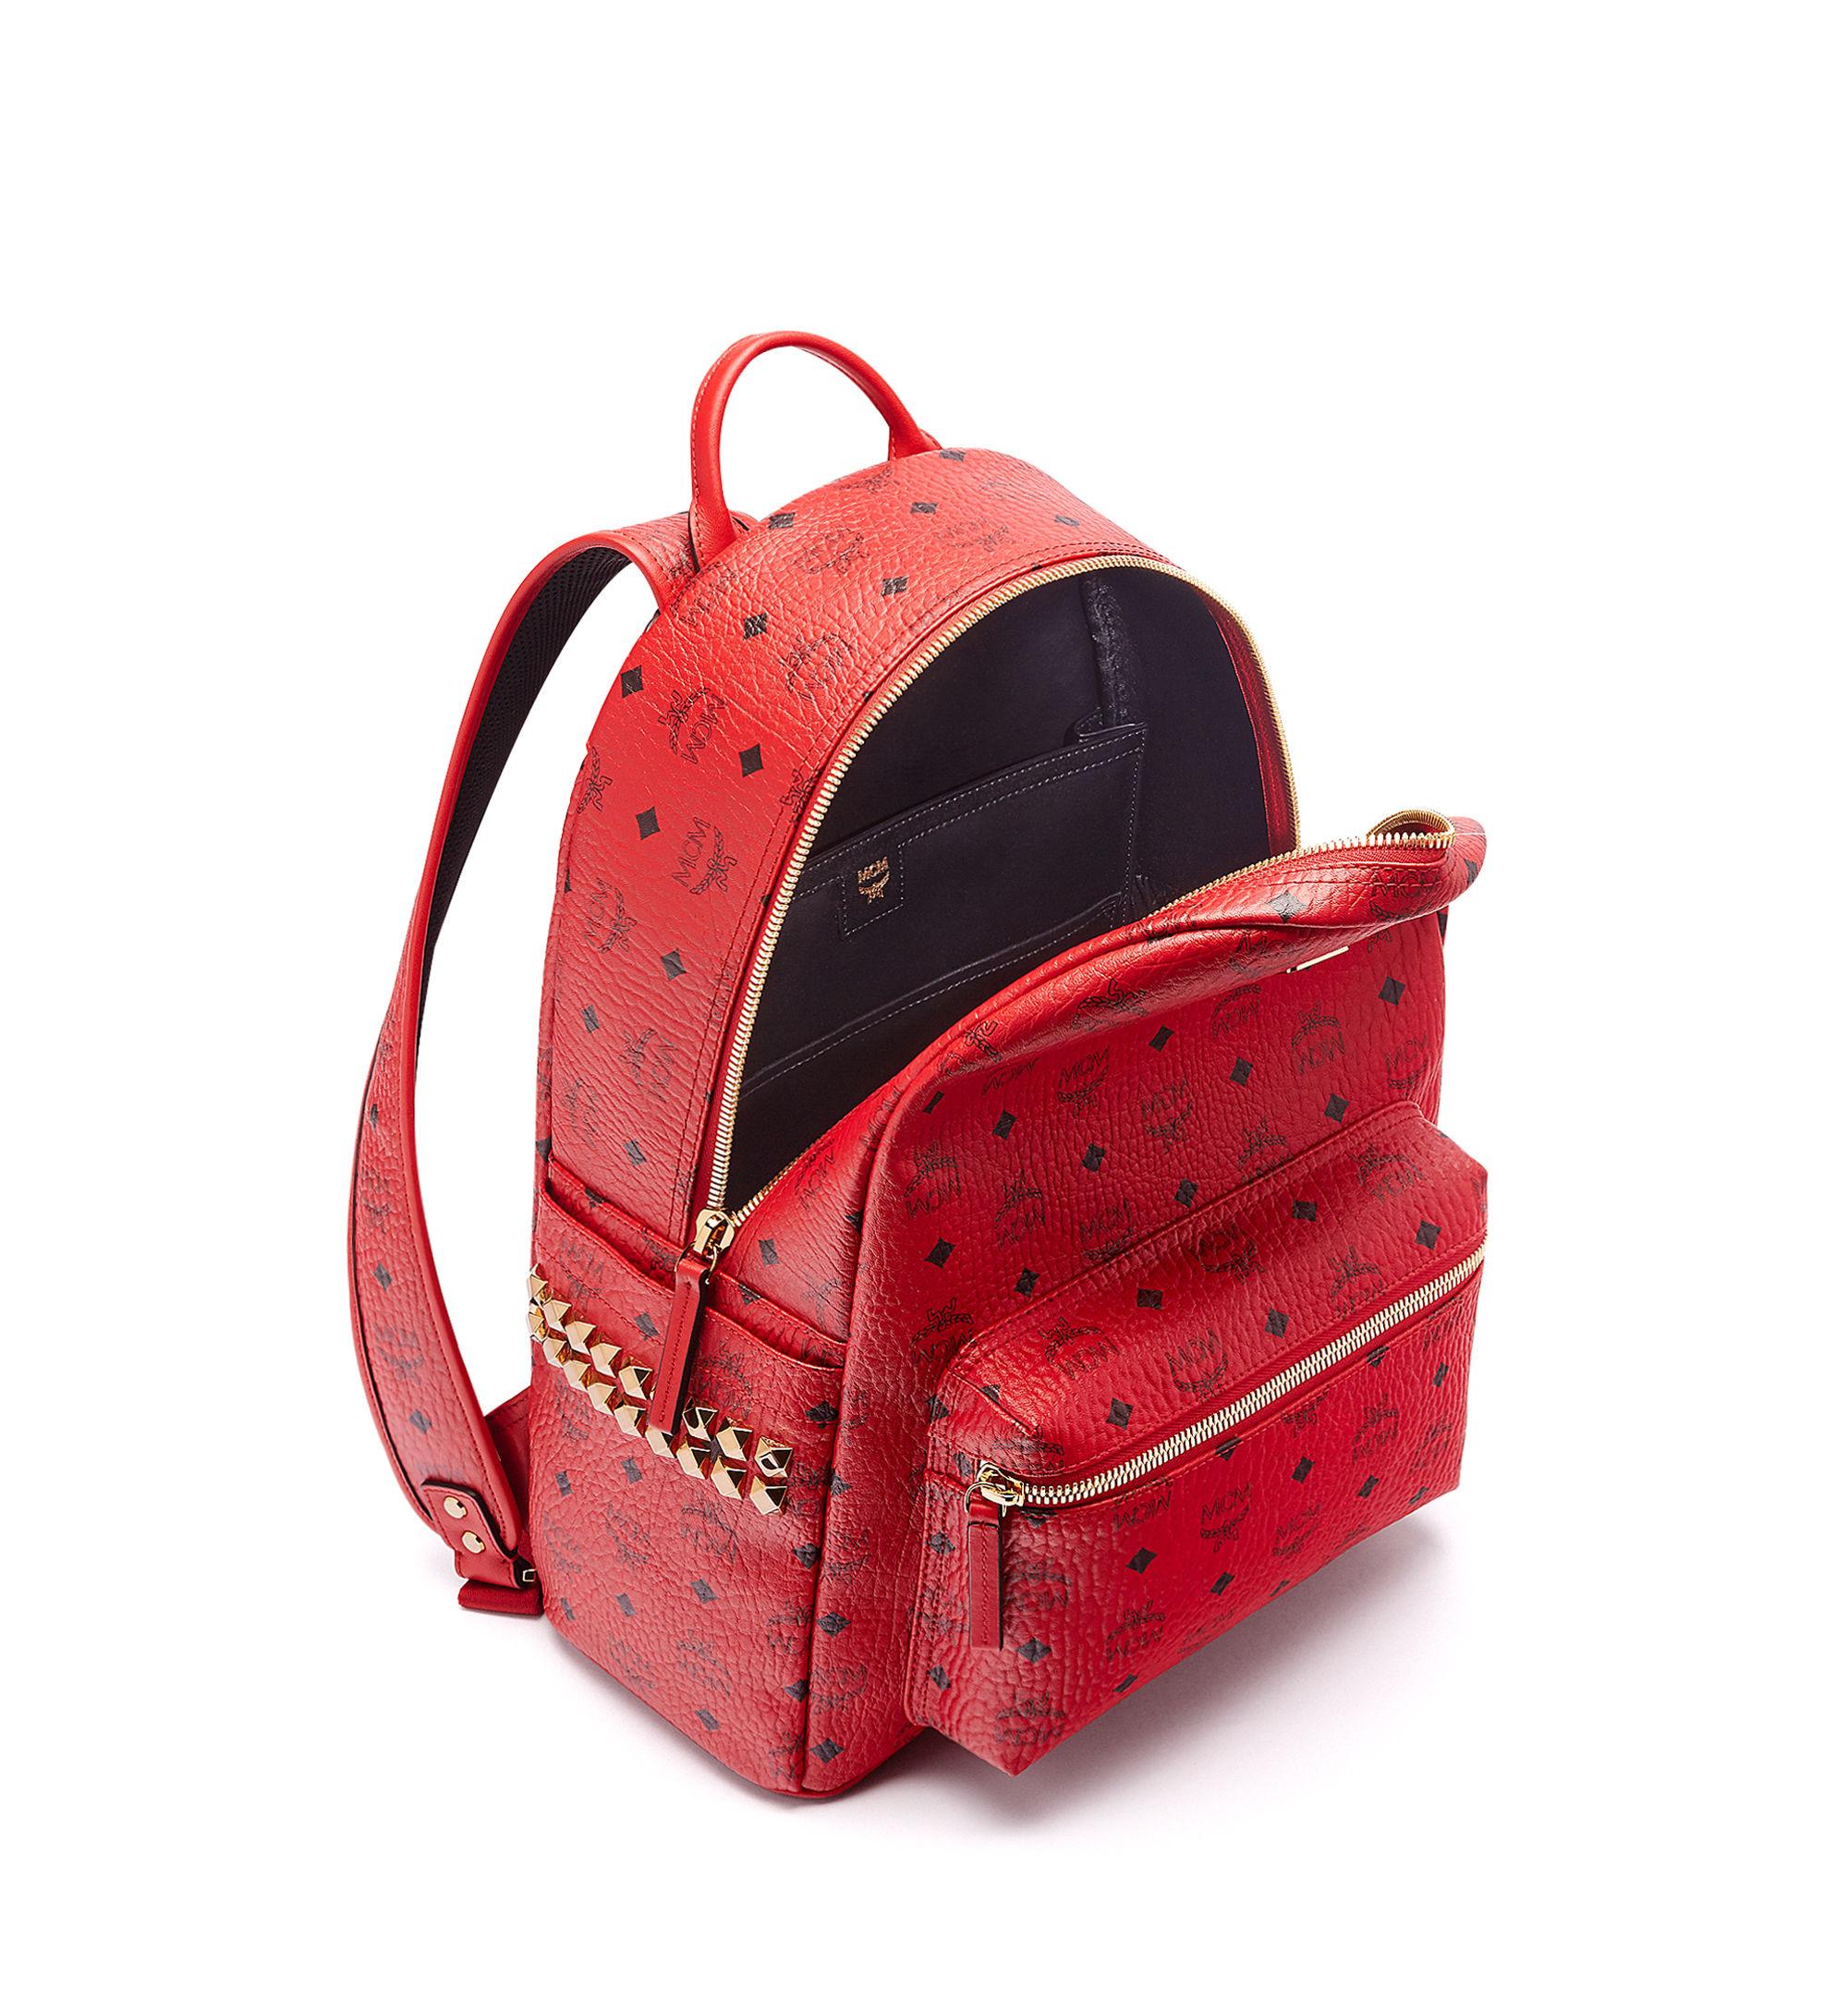 Mcm Stark Small Backpack in Red | Lyst